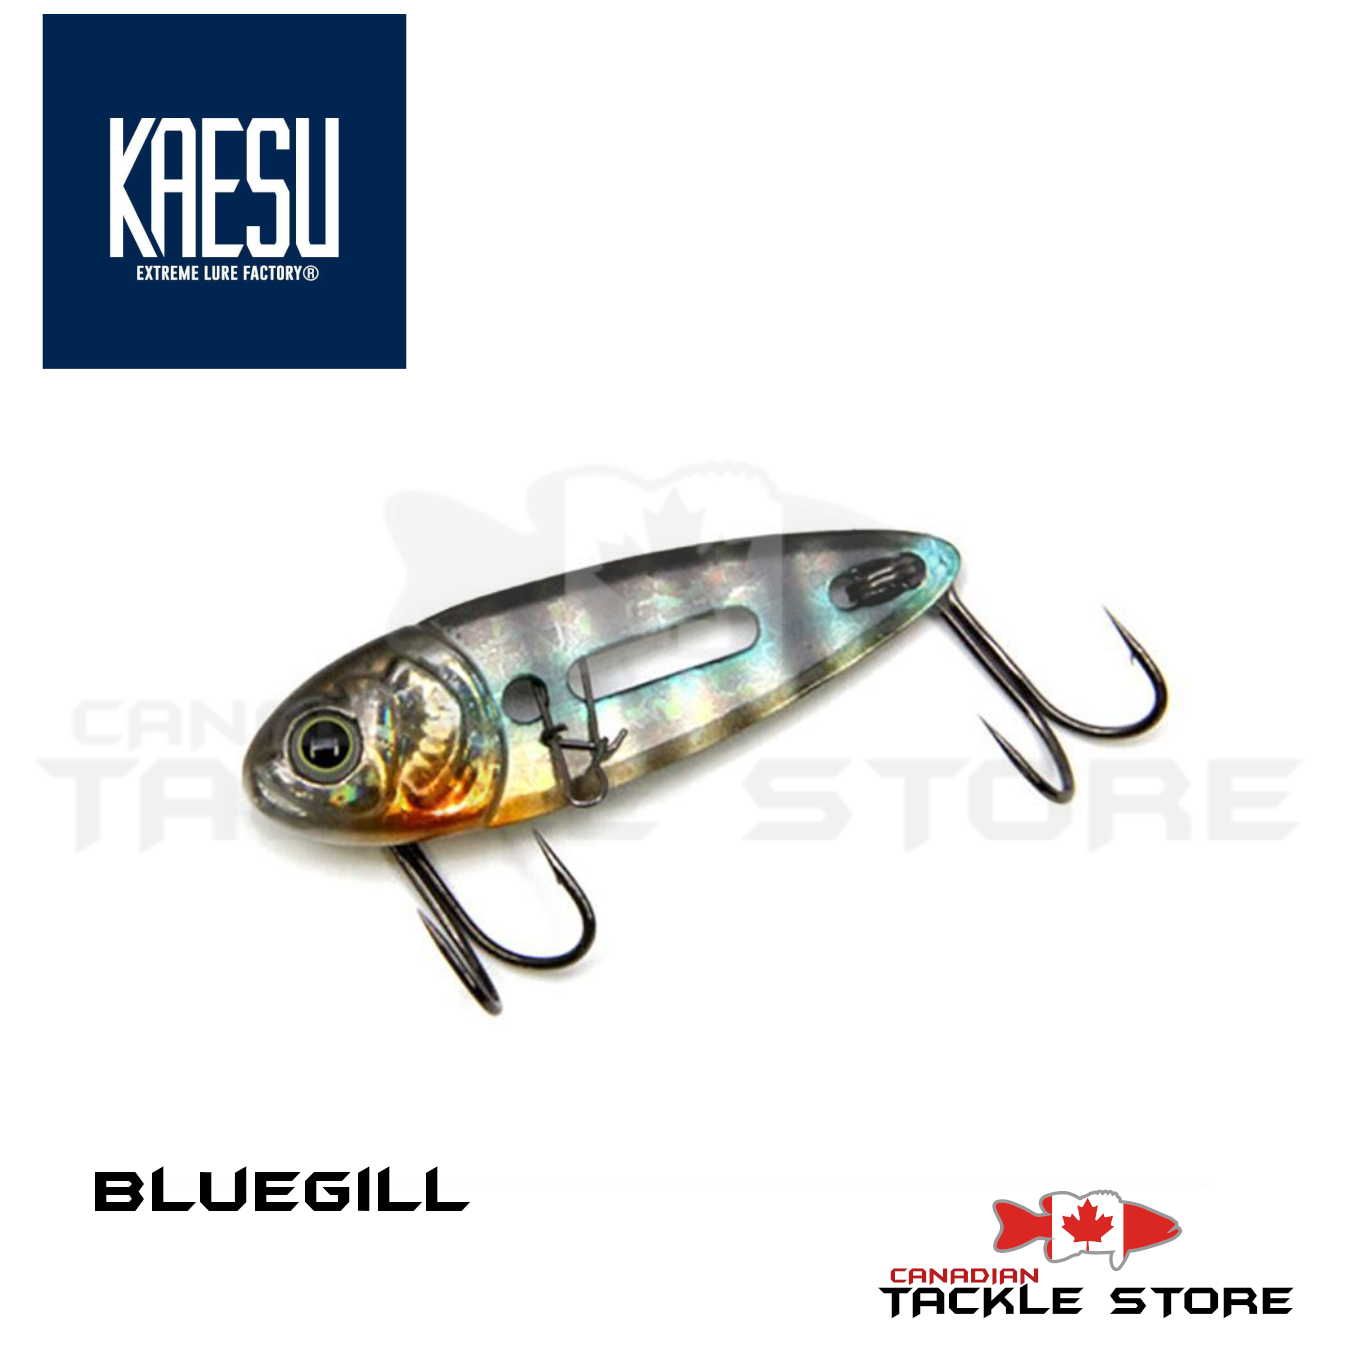 All Hard Baits – Canadian Tackle Store